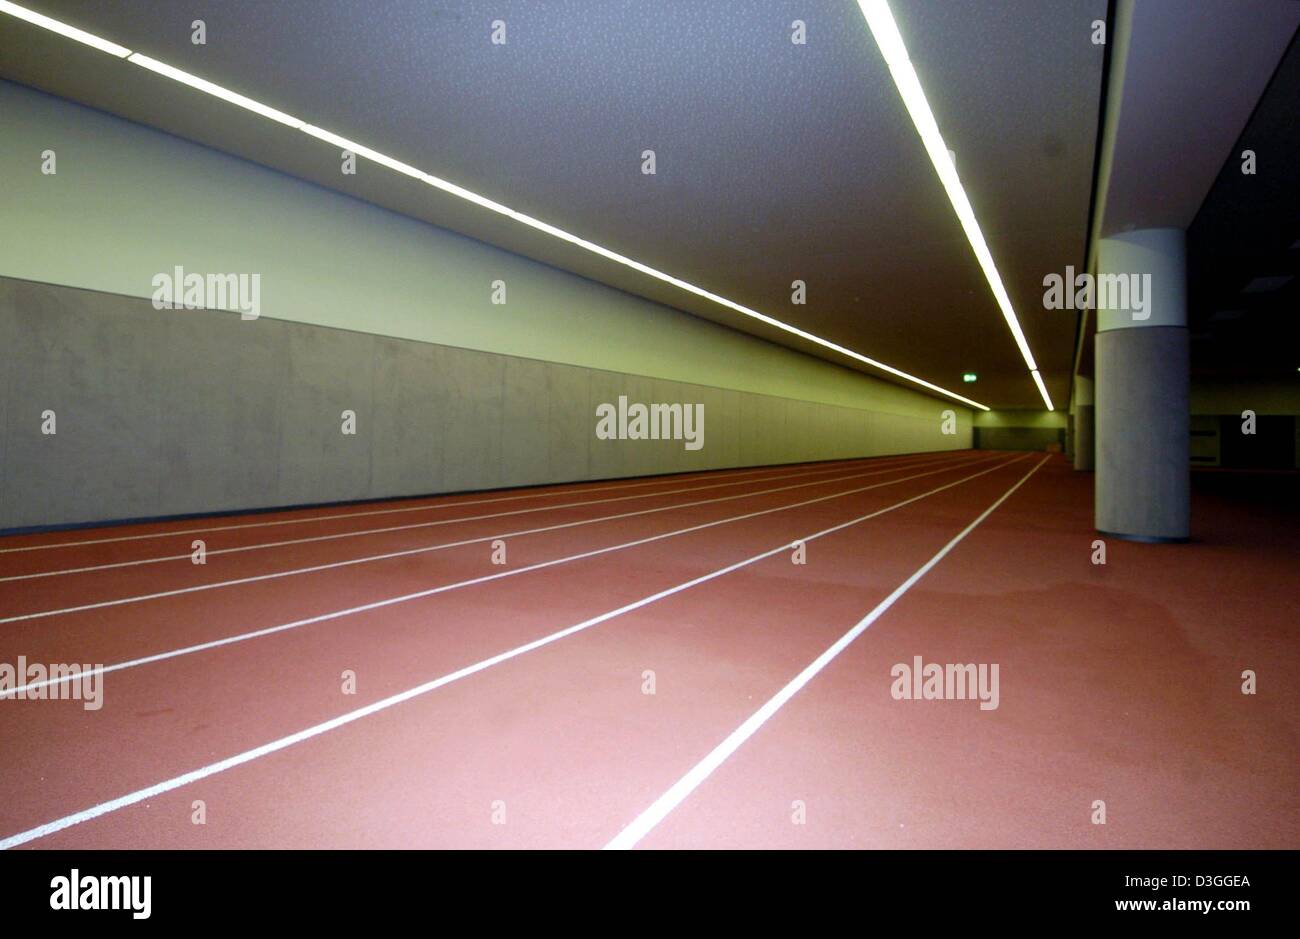 (dpa) - View of an inside running track at Olympic Stadium in Berlin, Germany, 27 August 2004. The stadium, which was originally built for the infamous 1936 Olympic Games that were used as a propaganda show by the Nazi regime, has been renovated at a cost of 240 million euros. The stadium, which now offers roofed seats for 76,000 spectators, will be the site of the FIFA Soccer Worl Stock Photo